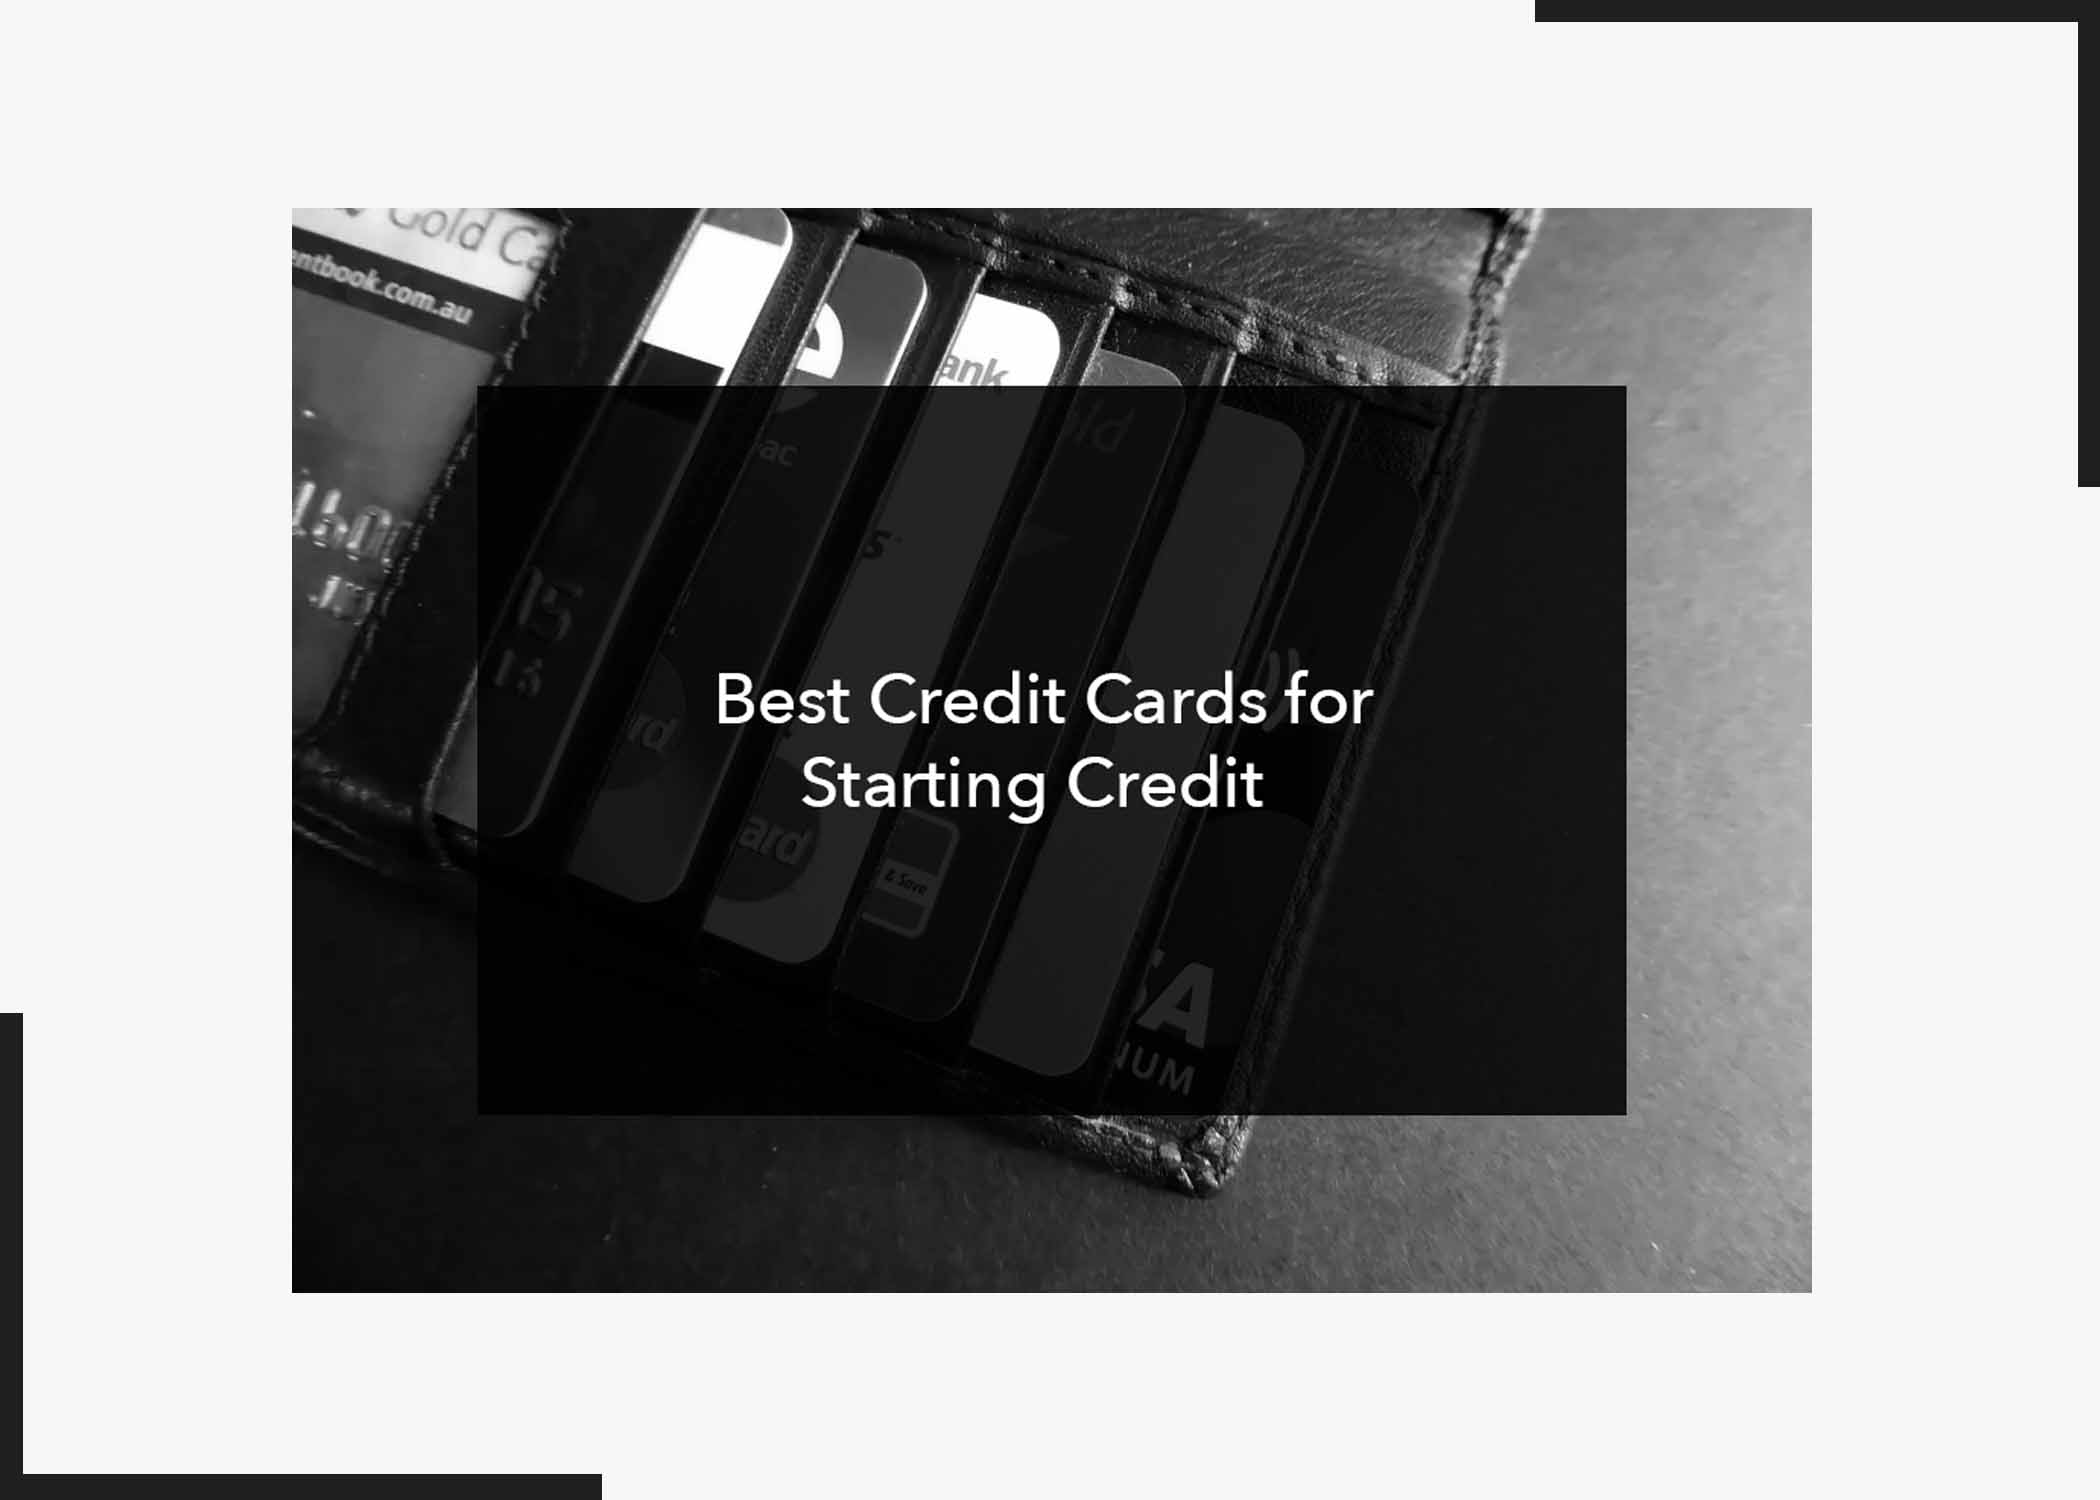 Best Credit Cards for Starting Credit